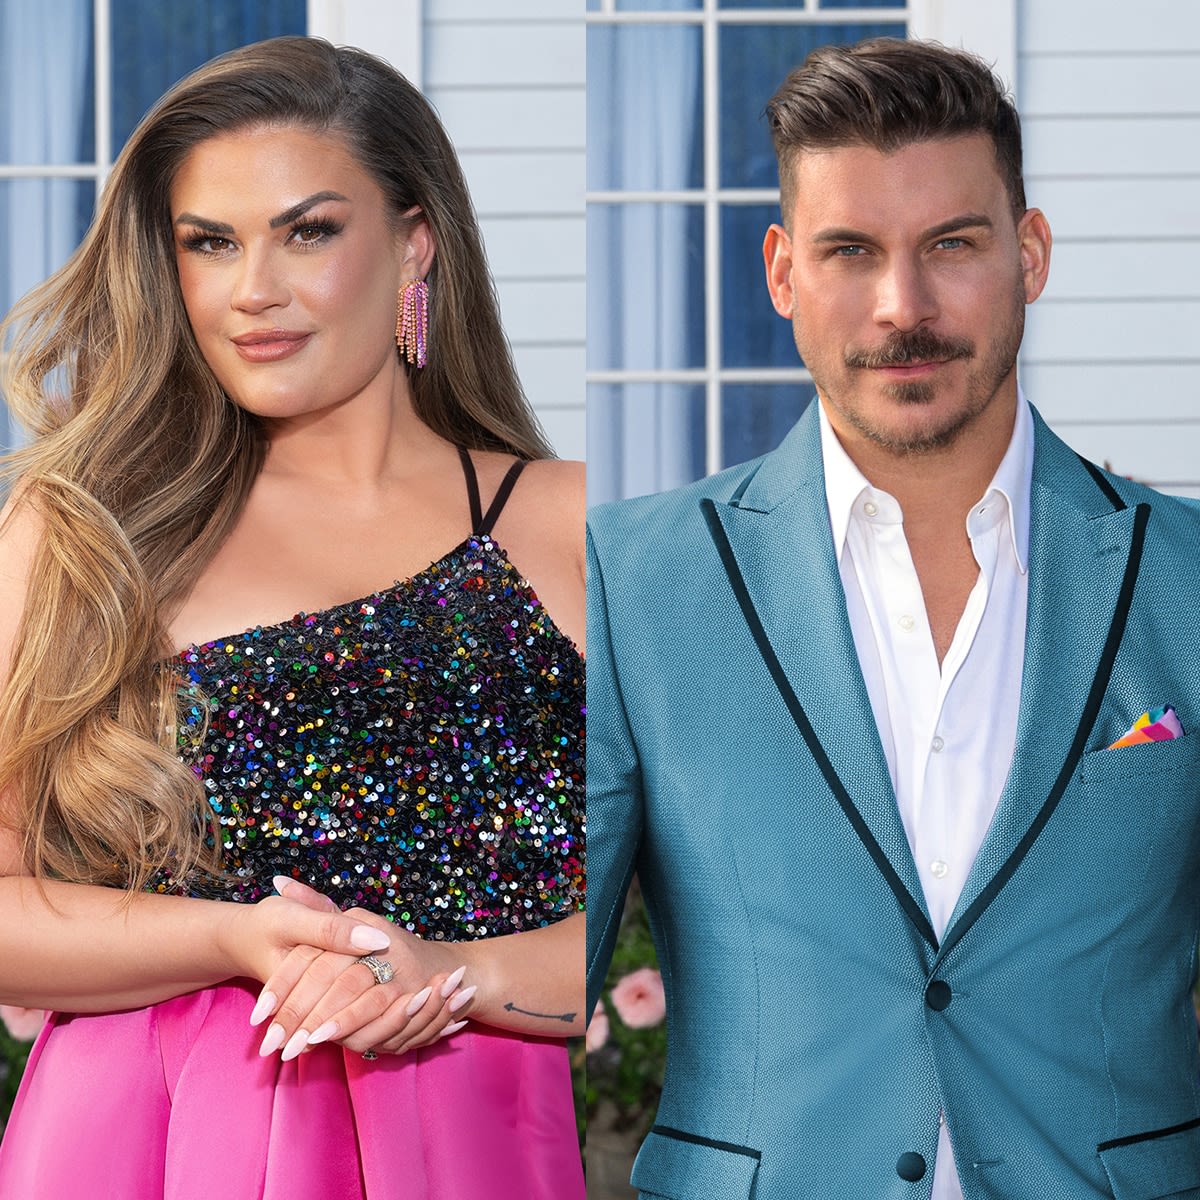 Brittany Cartwright Details Jax Taylor's Horrible Insults Before Split